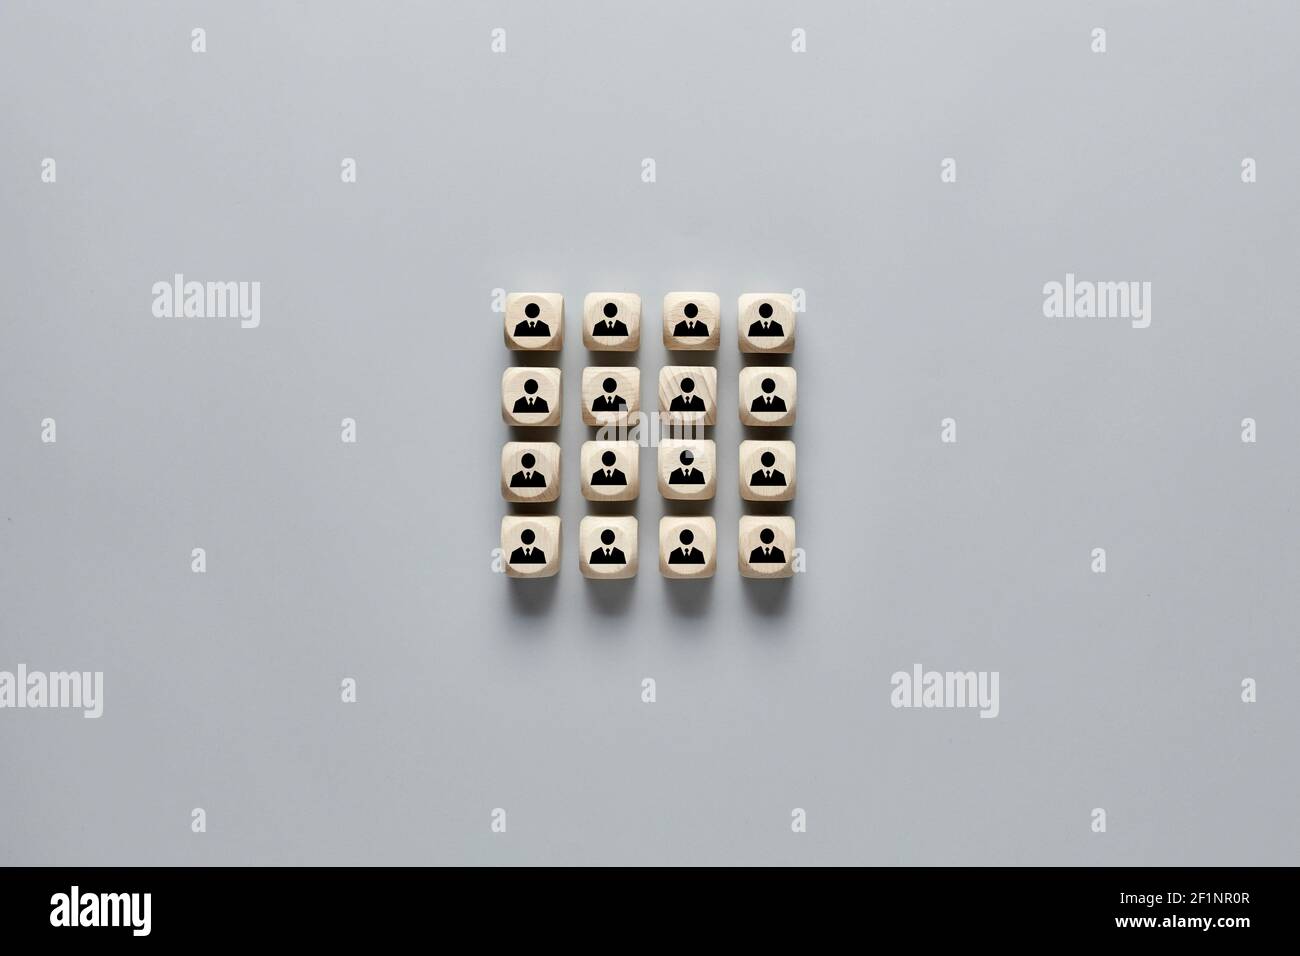 Wooden cubes with employee icons. Concept of recruitment, hiring or team building. Stock Photo